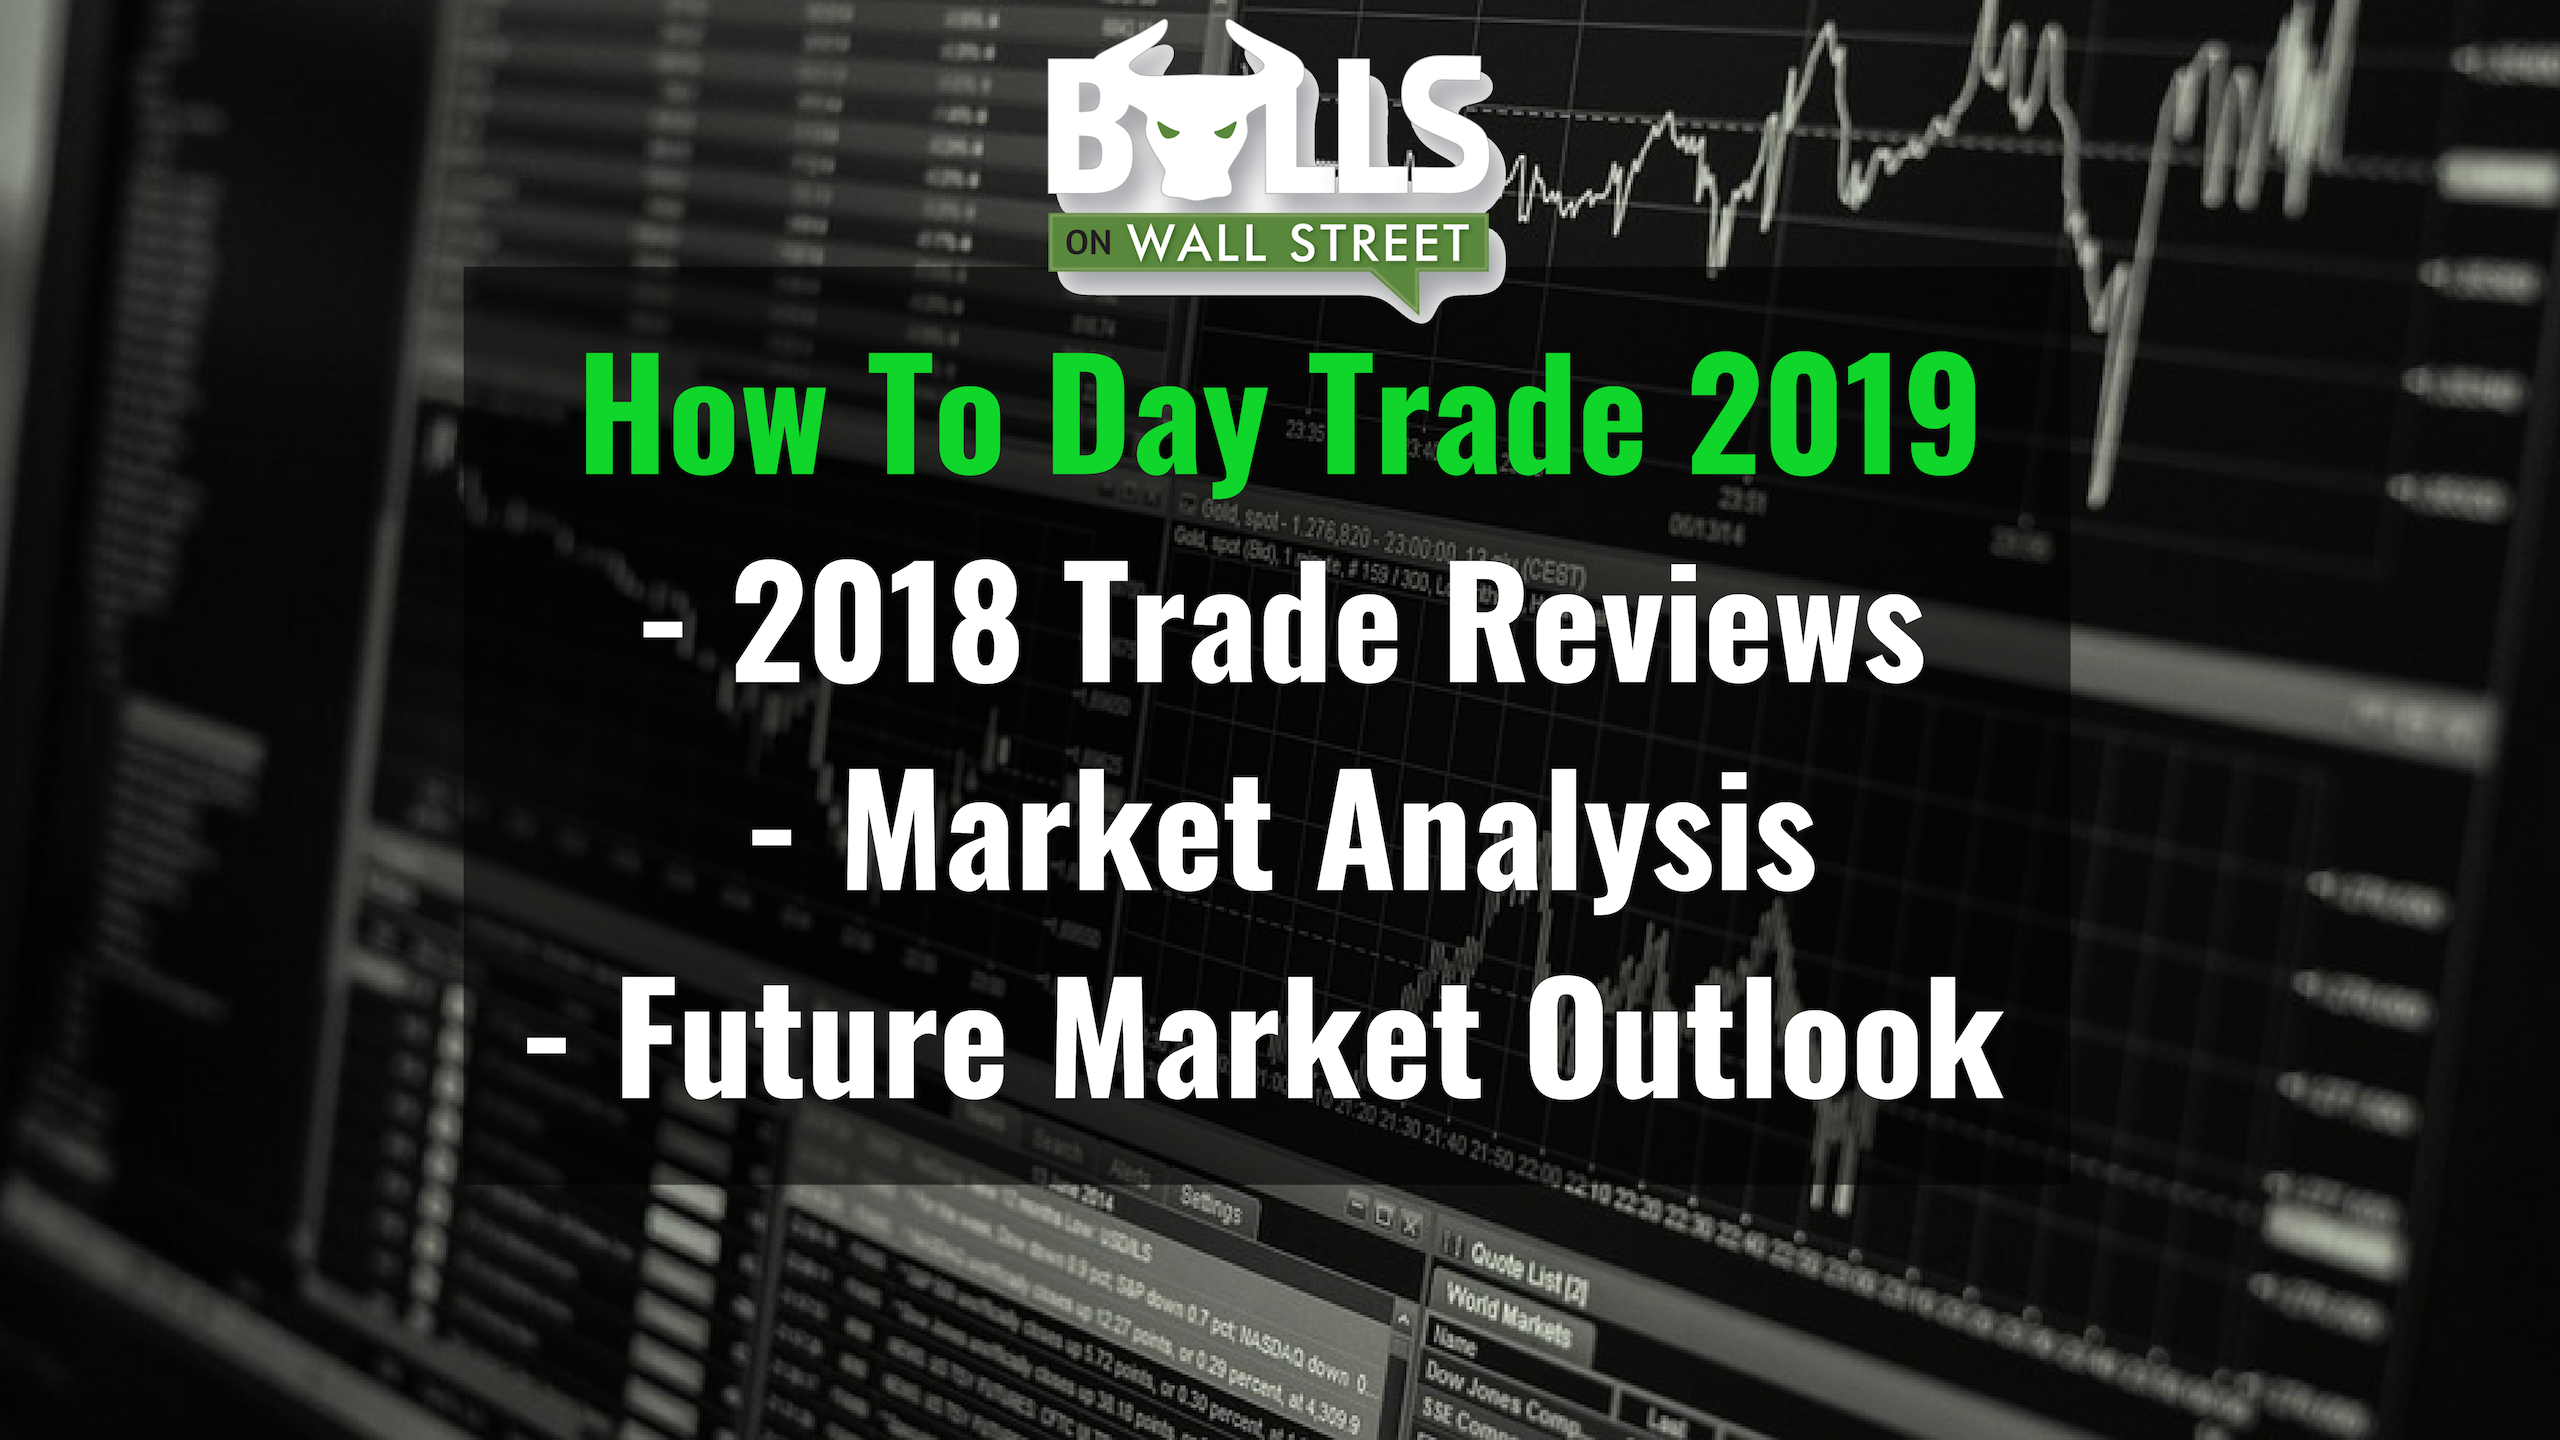 How To Day Trade 2019